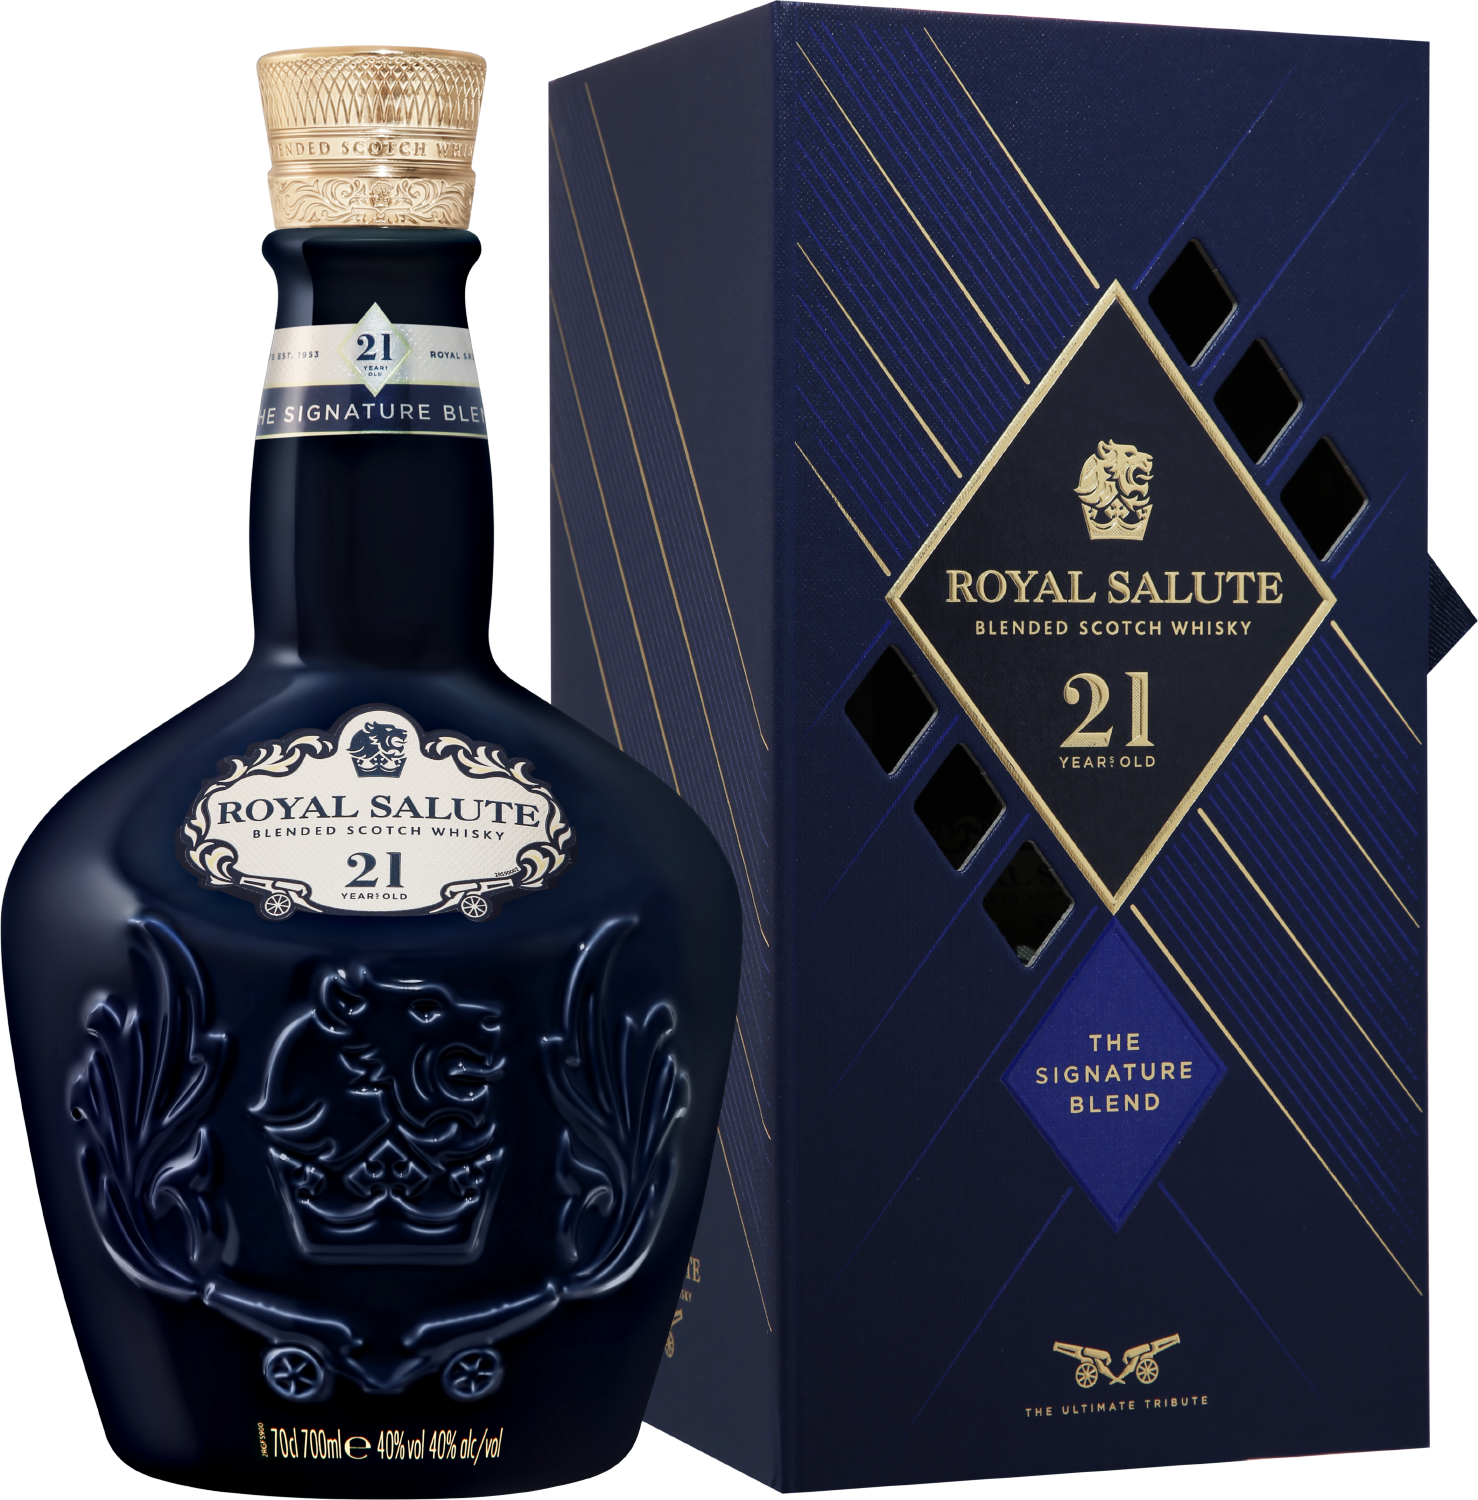 Royal Salute Blended Scotch Whisky 21 y.o.(gift box) royal salute blended scotch whisky 21 y o gift box